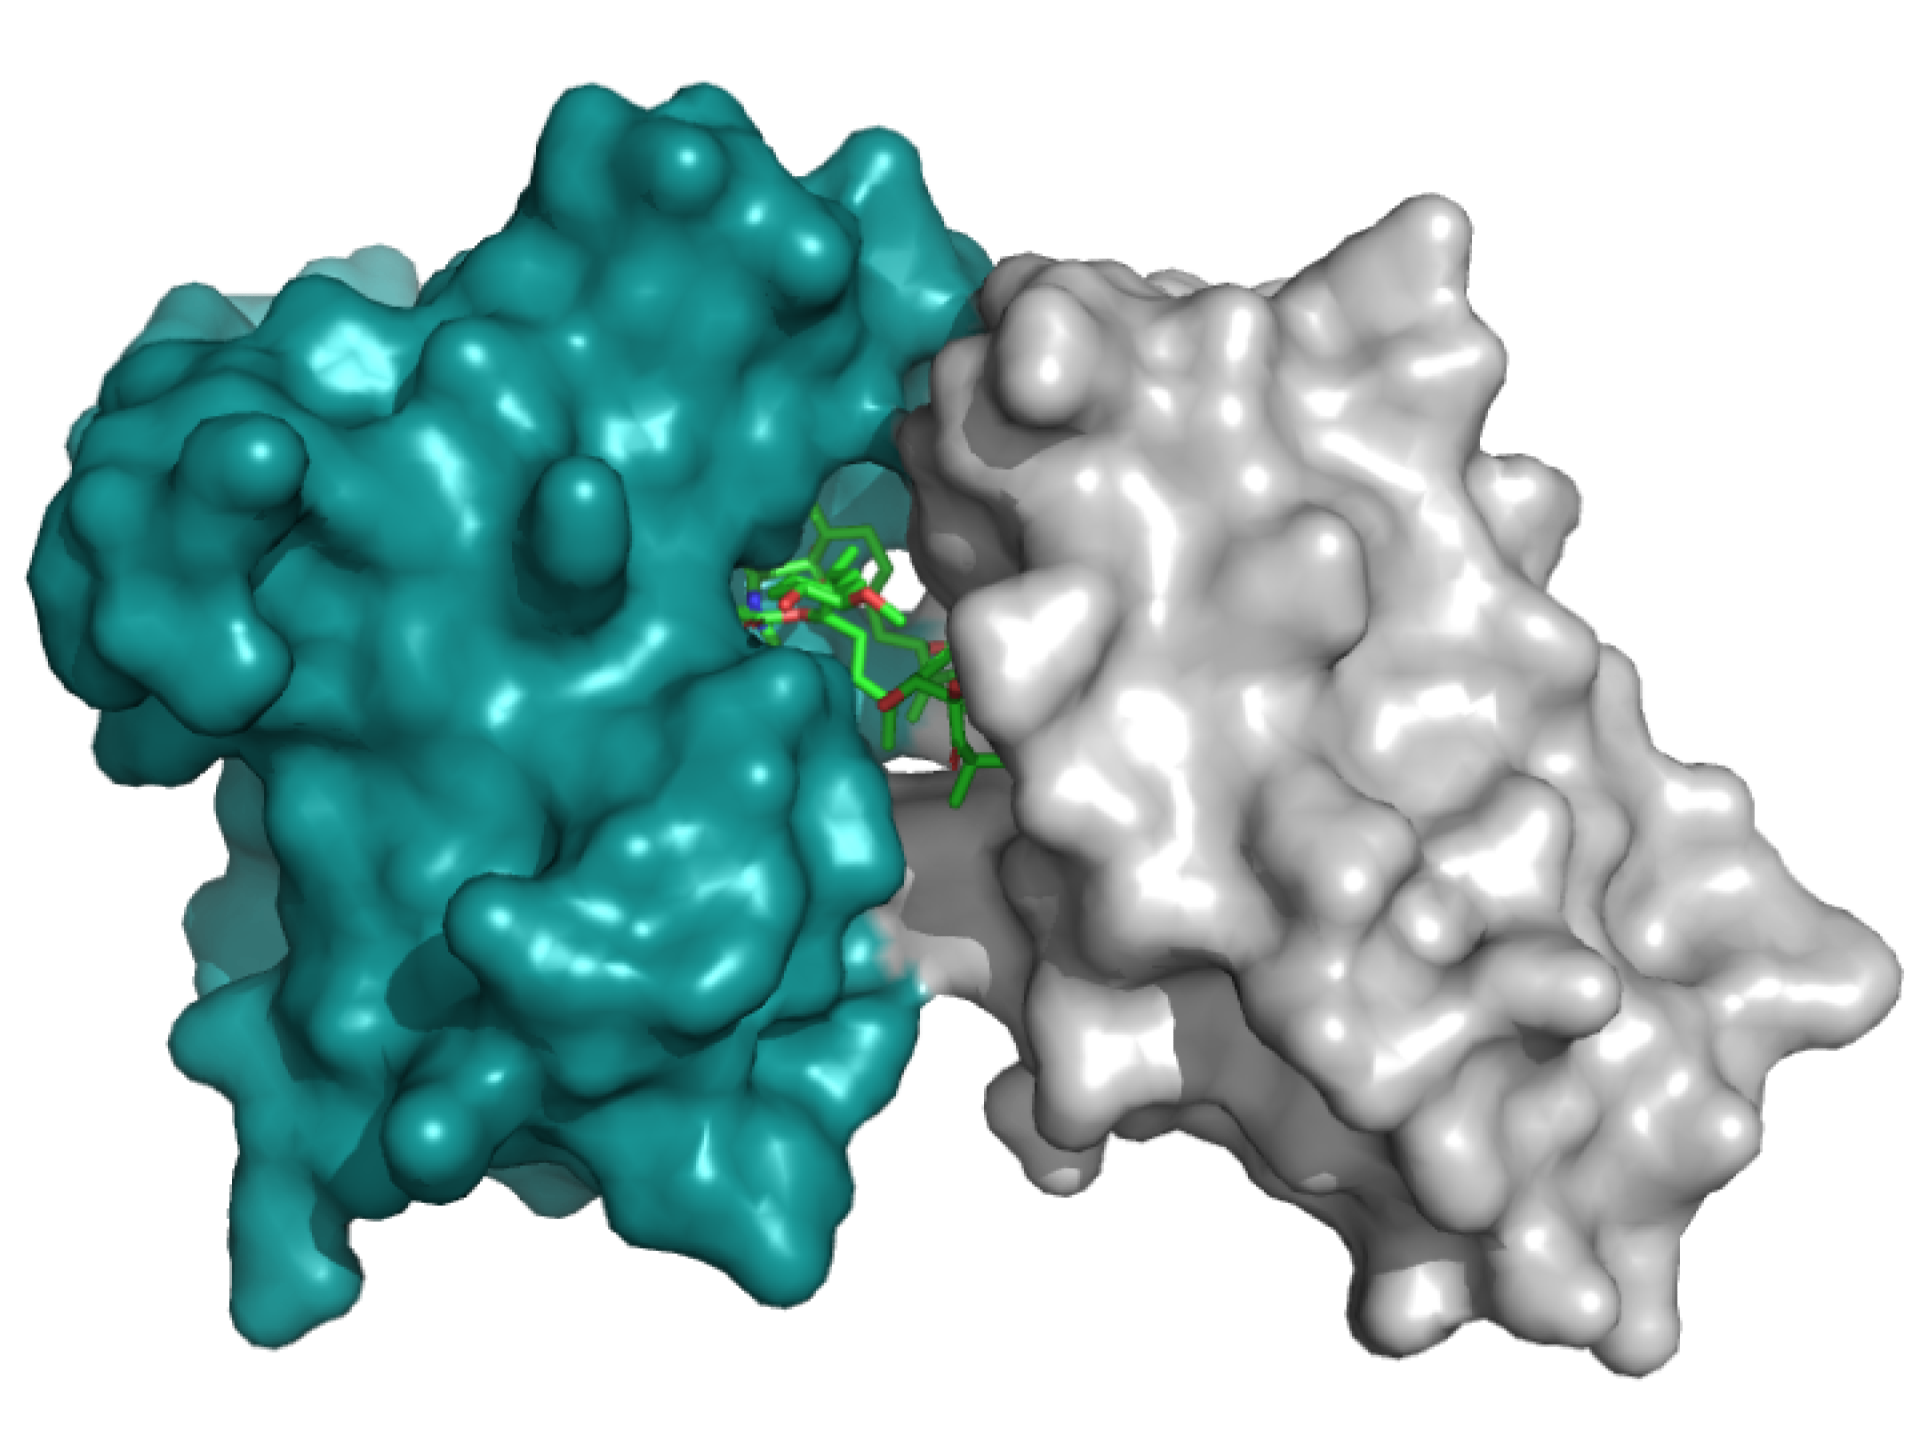 Computer generated model of two proteins